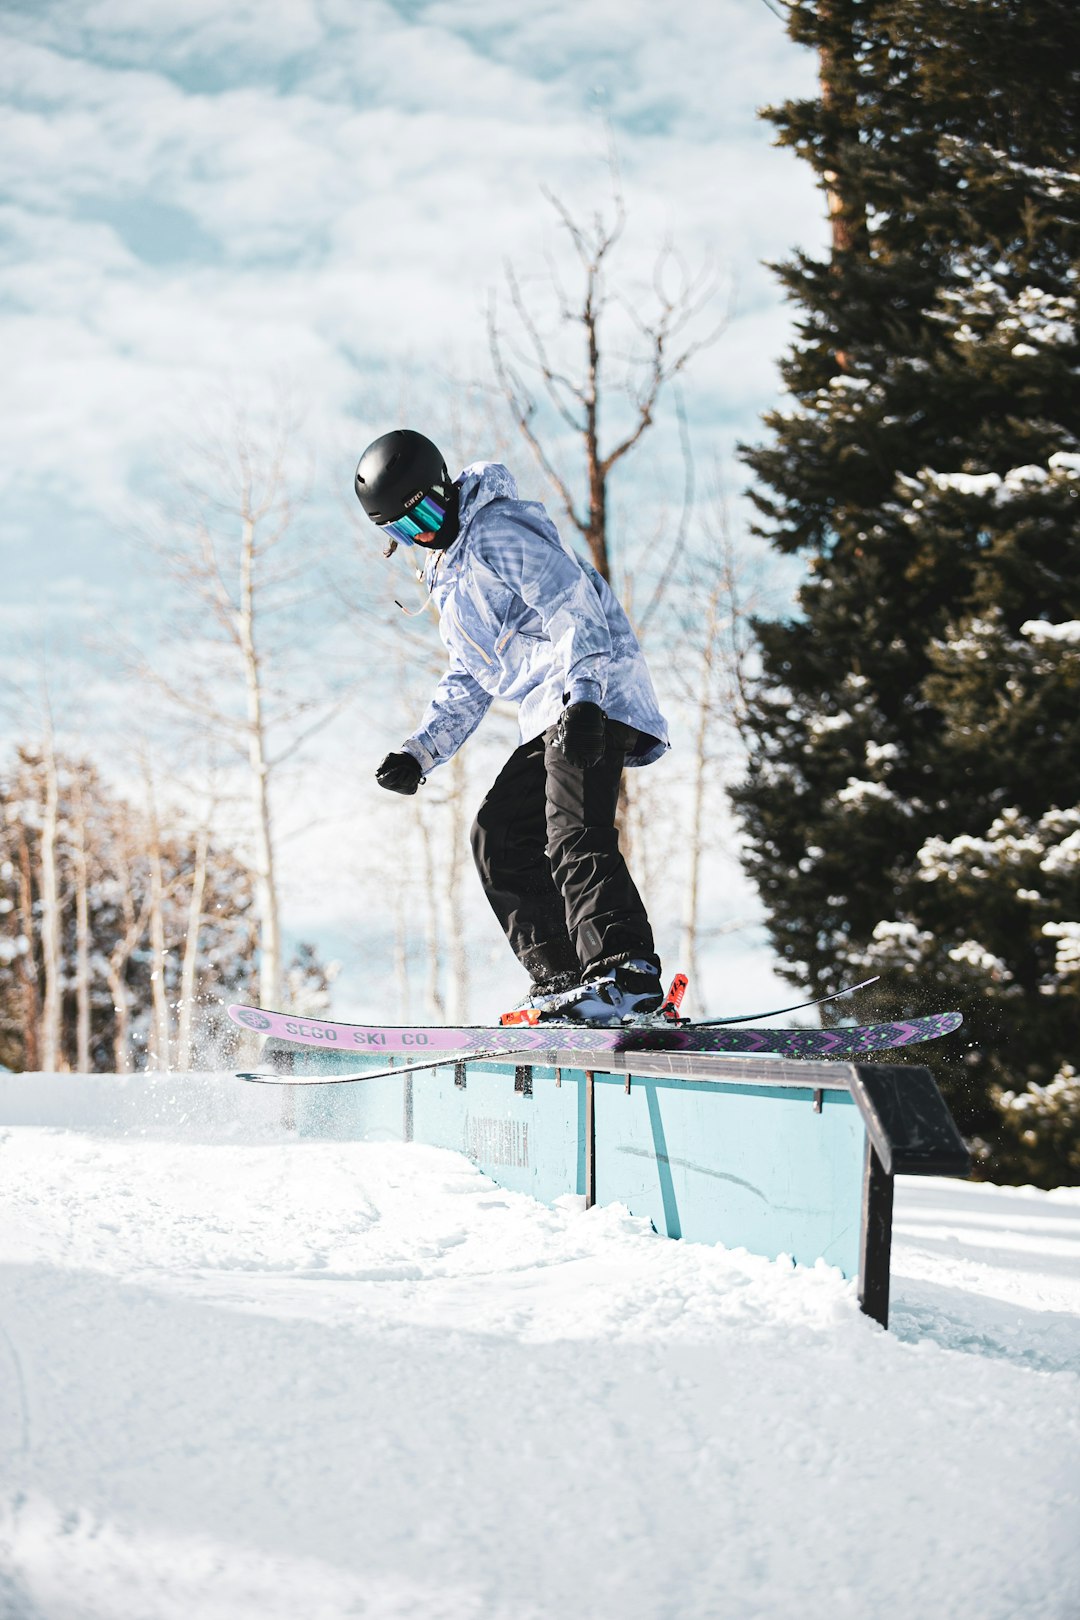 man in blue jacket and black pants riding on snowboard during daytime